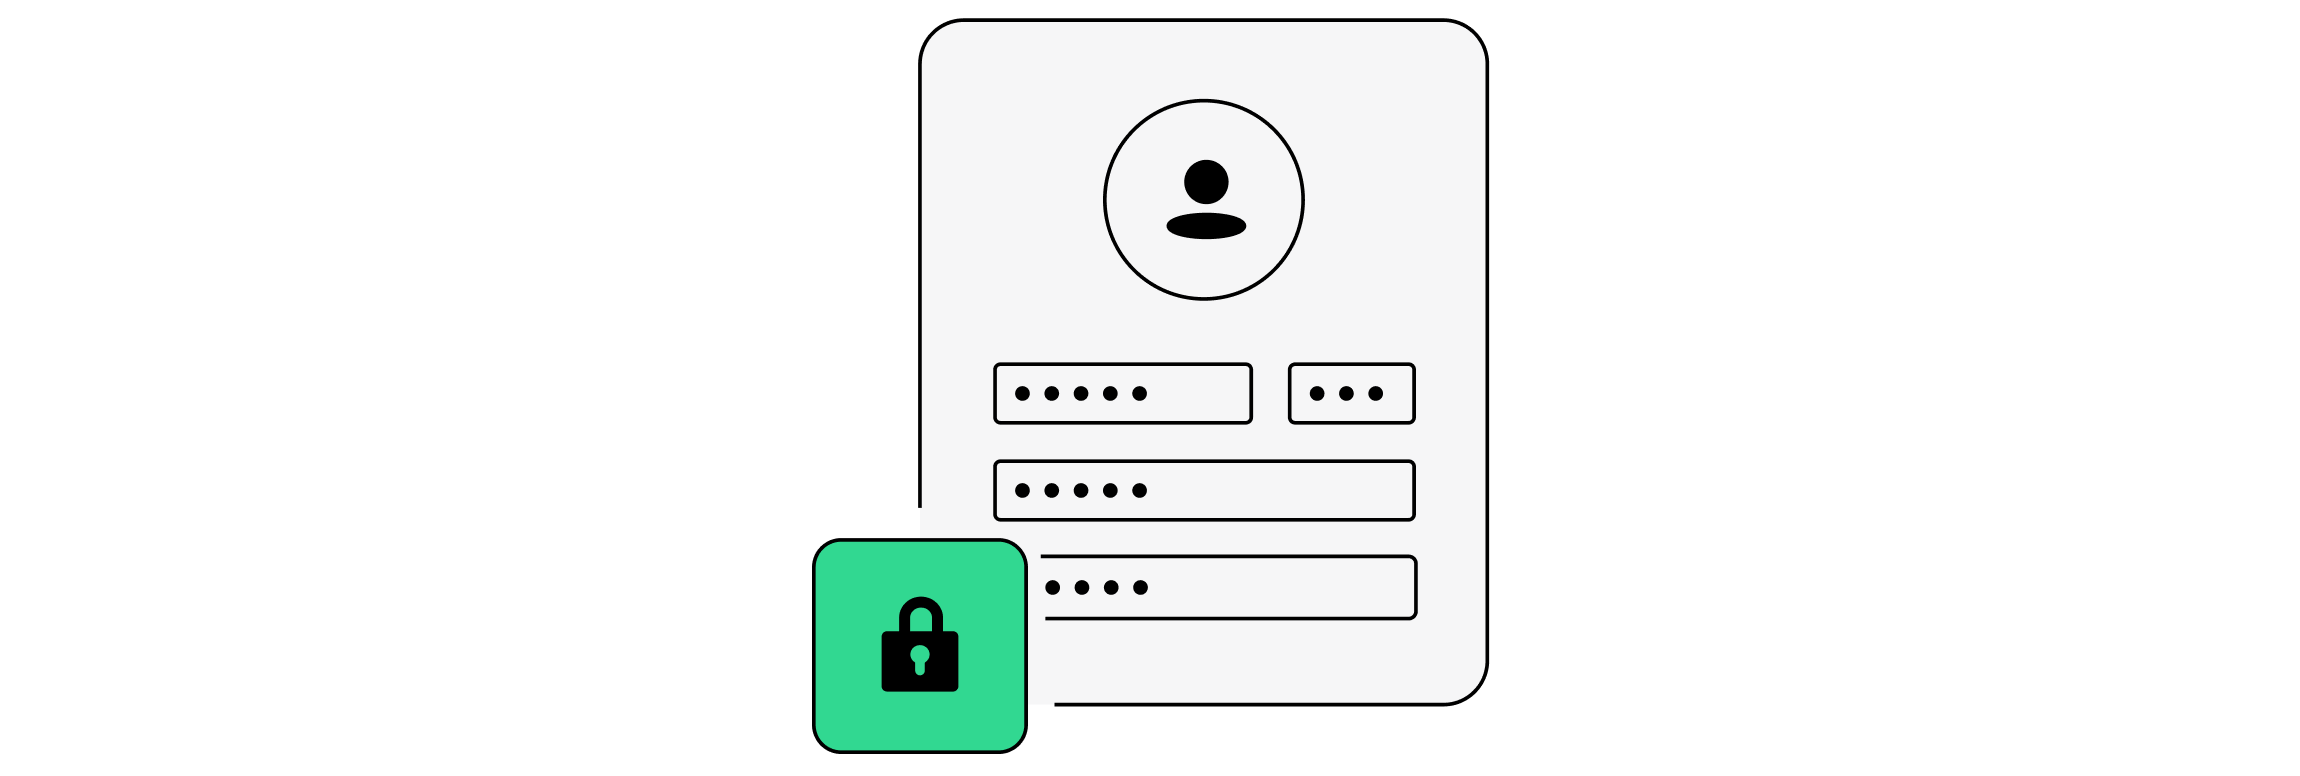 An illustration depicting security of a user profile.